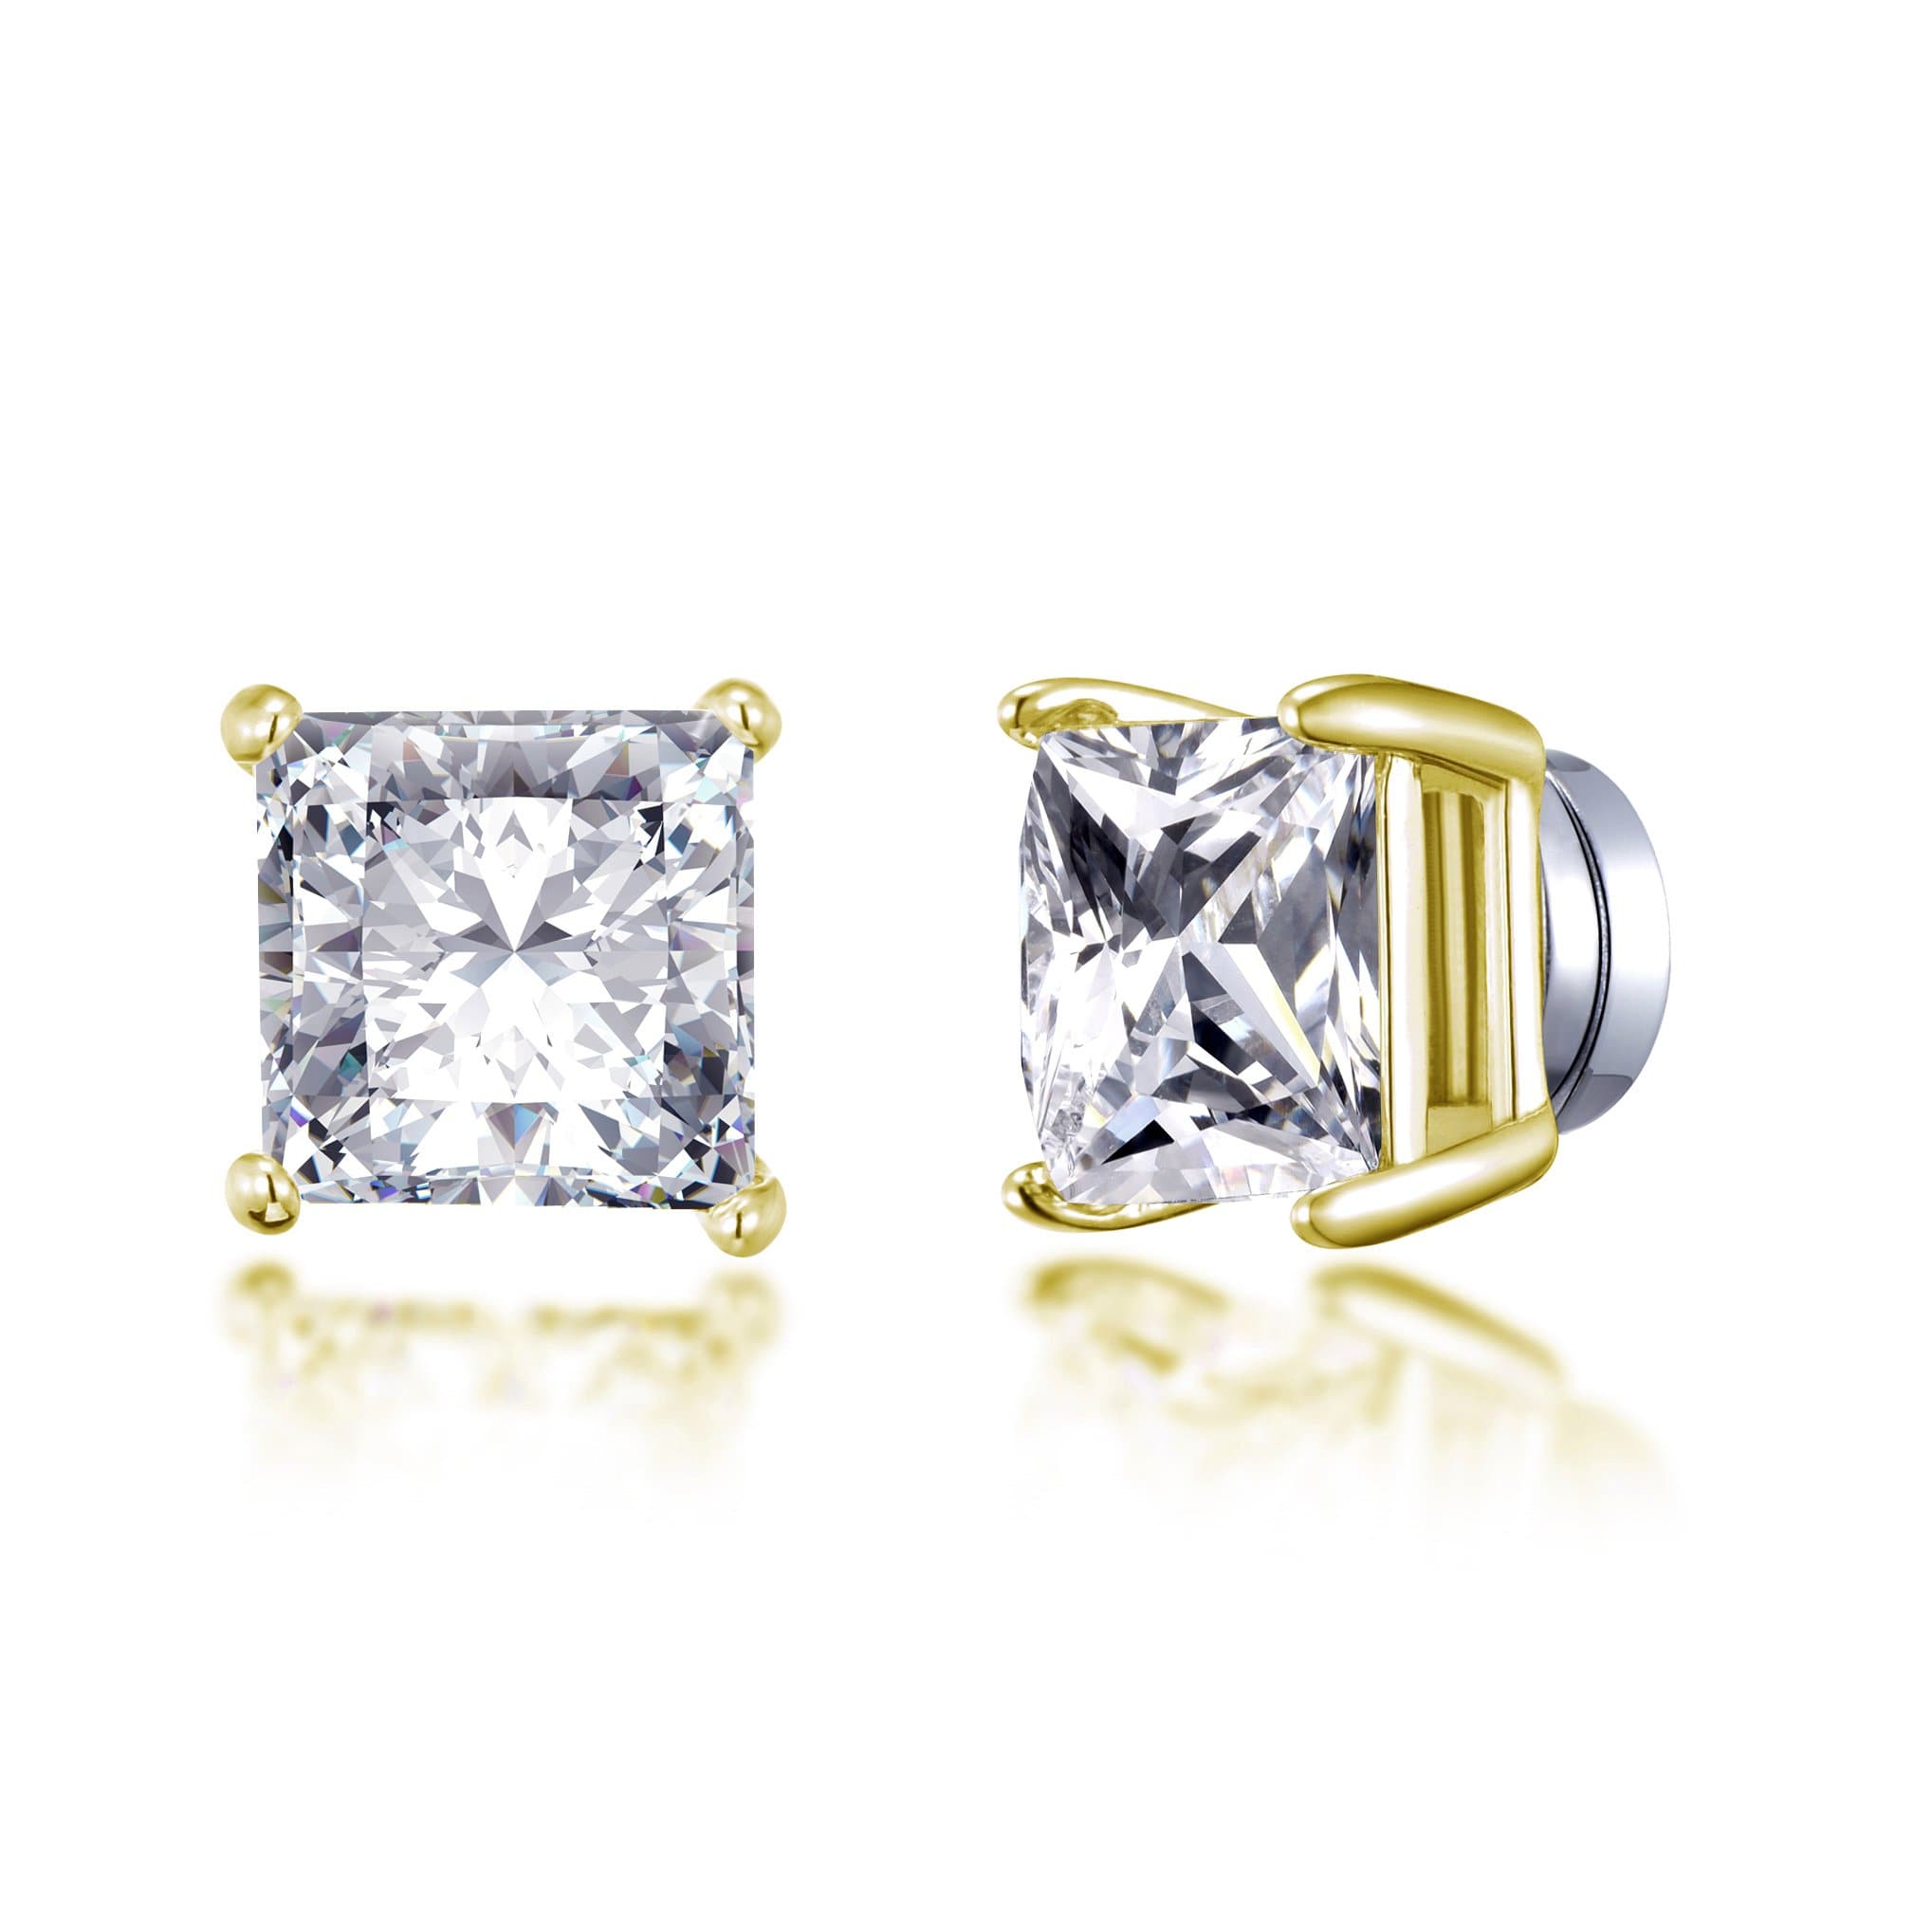 Men's Gold Plated Square Magnetic Clip On Stud Earrings Created with Zircondia® Crystals by Philip Jones Jewellery